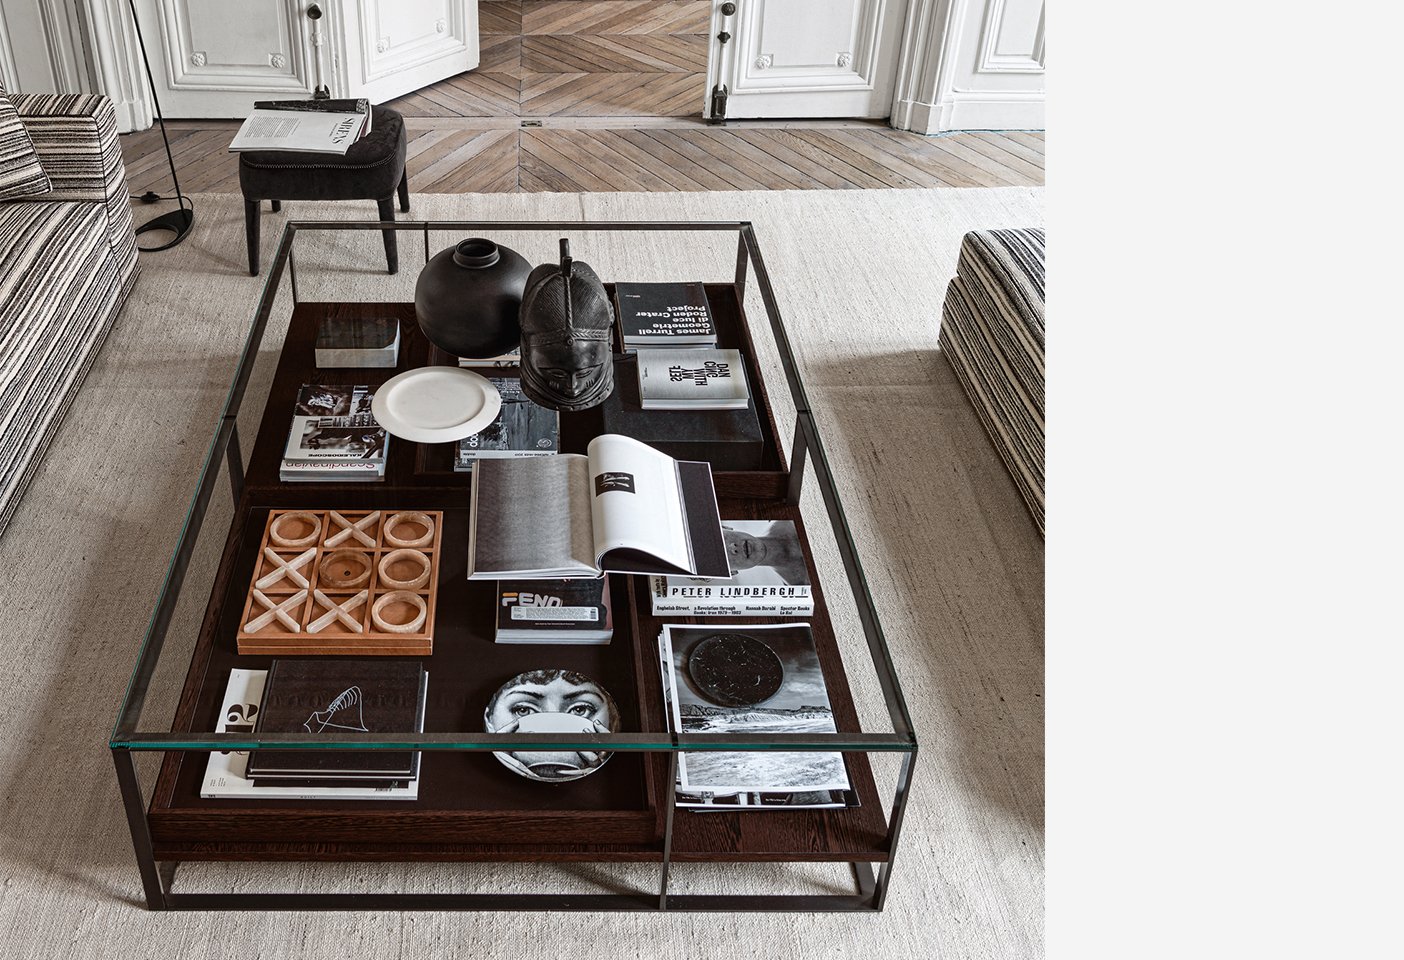 Maxalto Lithos Coffee Table - the perfect place to exhibit the most precious objects